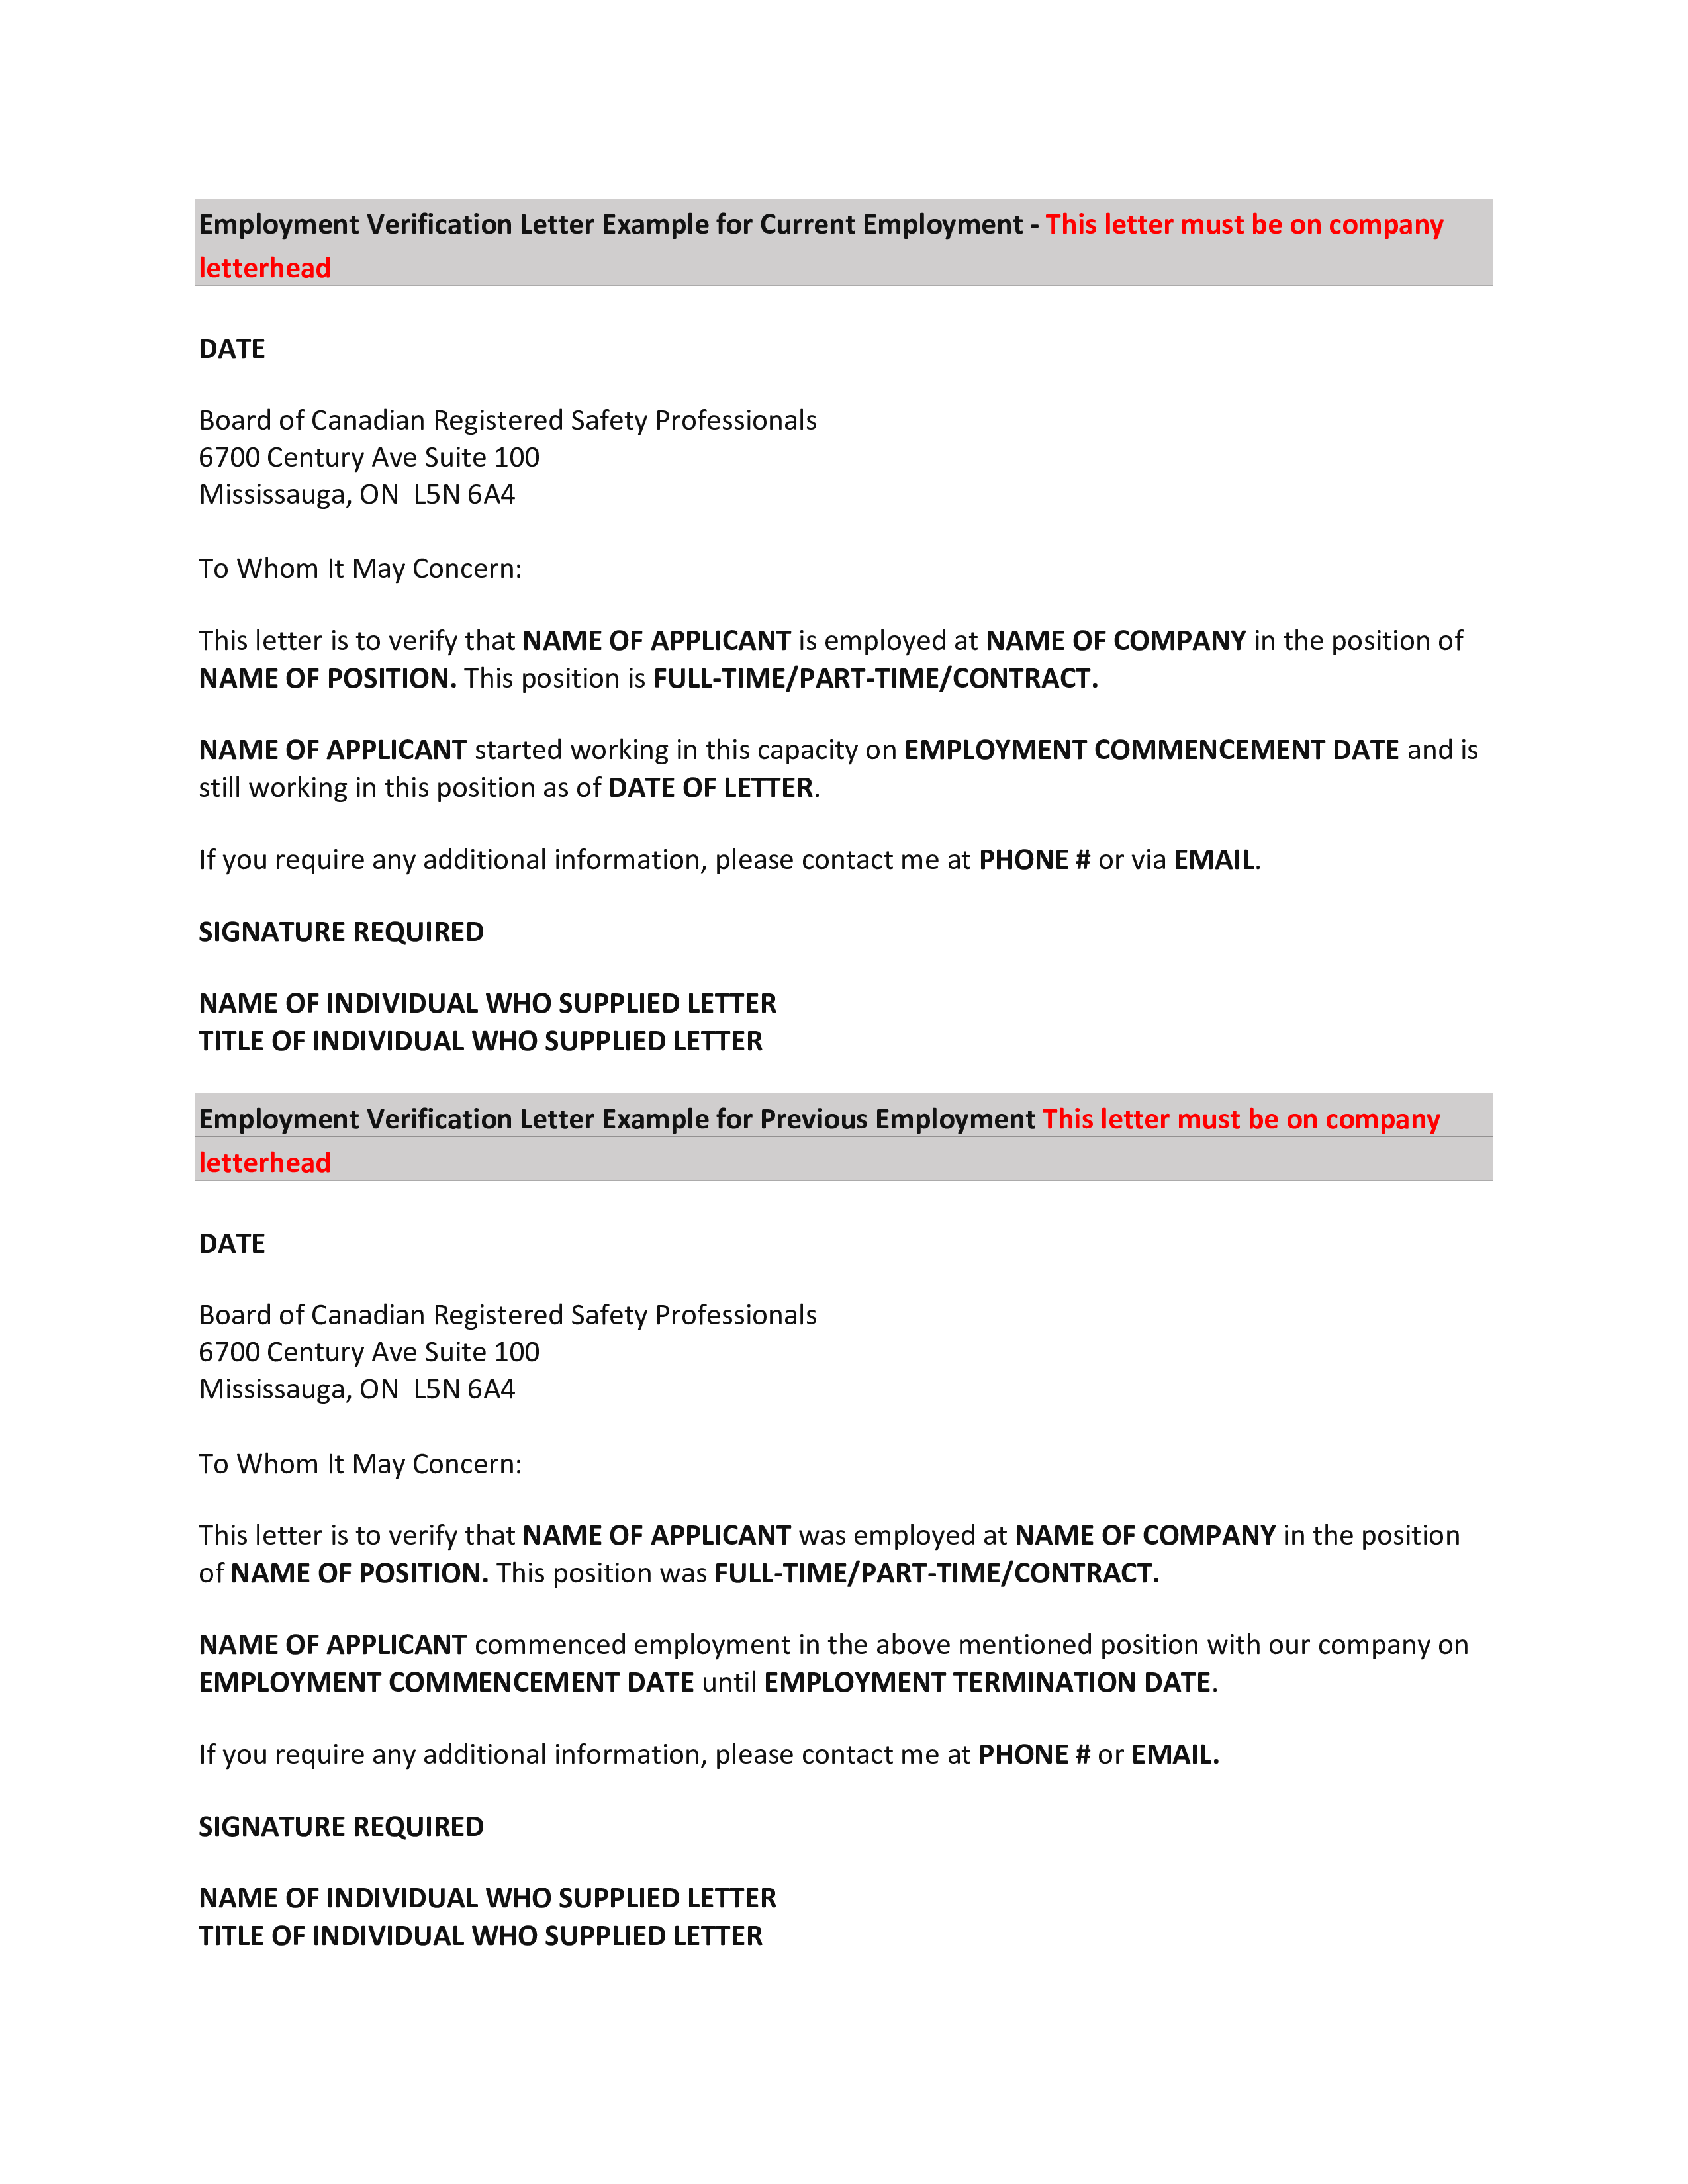 Employee Letter Of Employment Verification main image